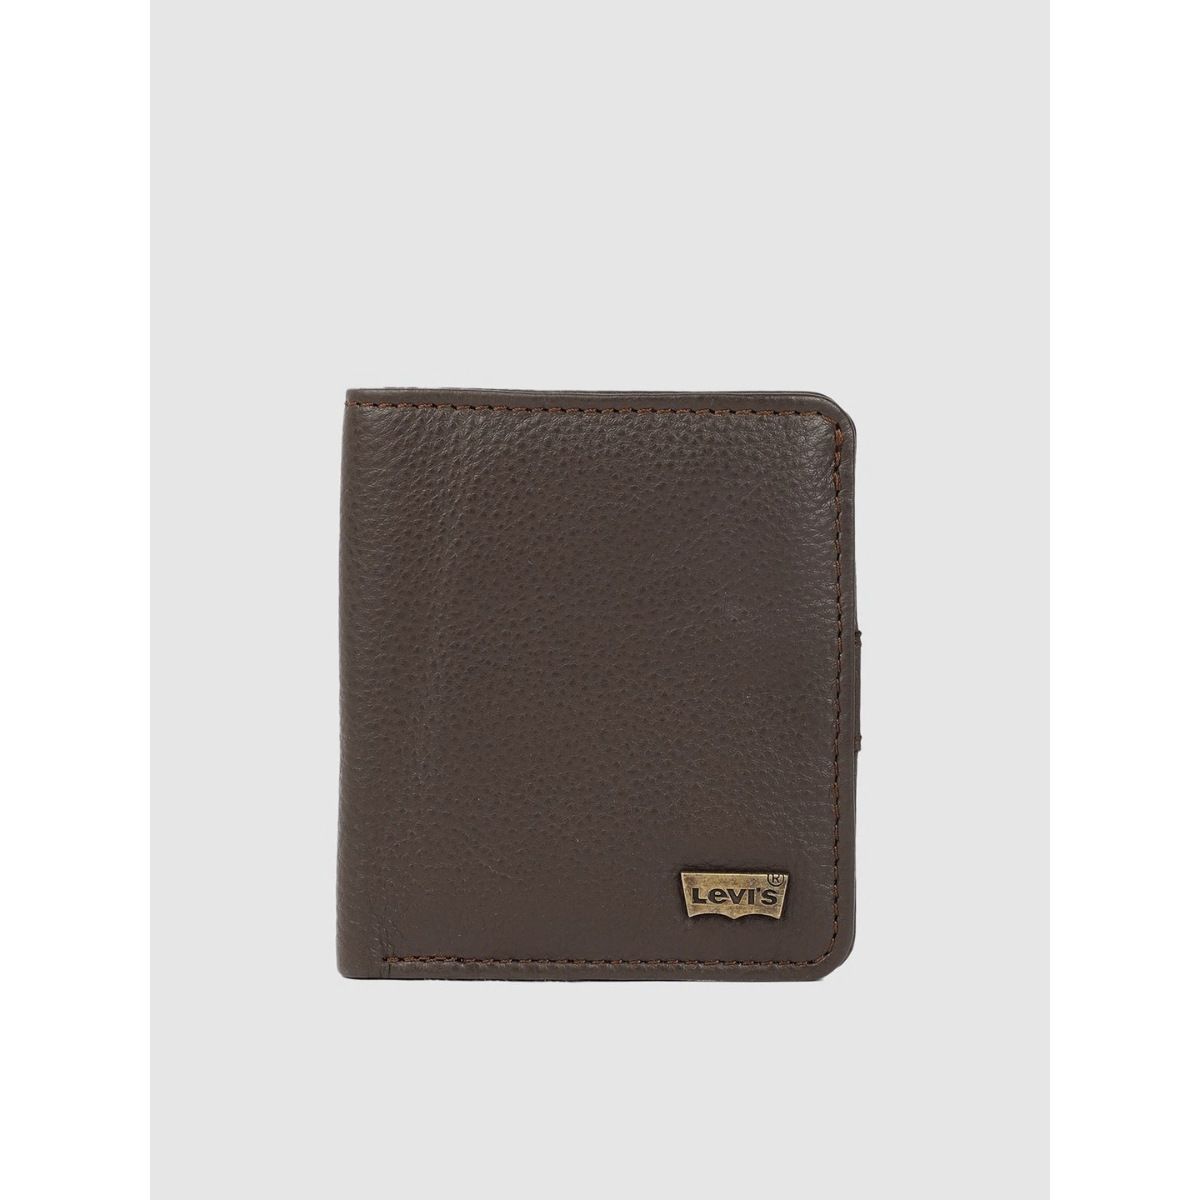 New Levi's Leather Wallet - clothing & accessories - by owner - apparel  sale - craigslist